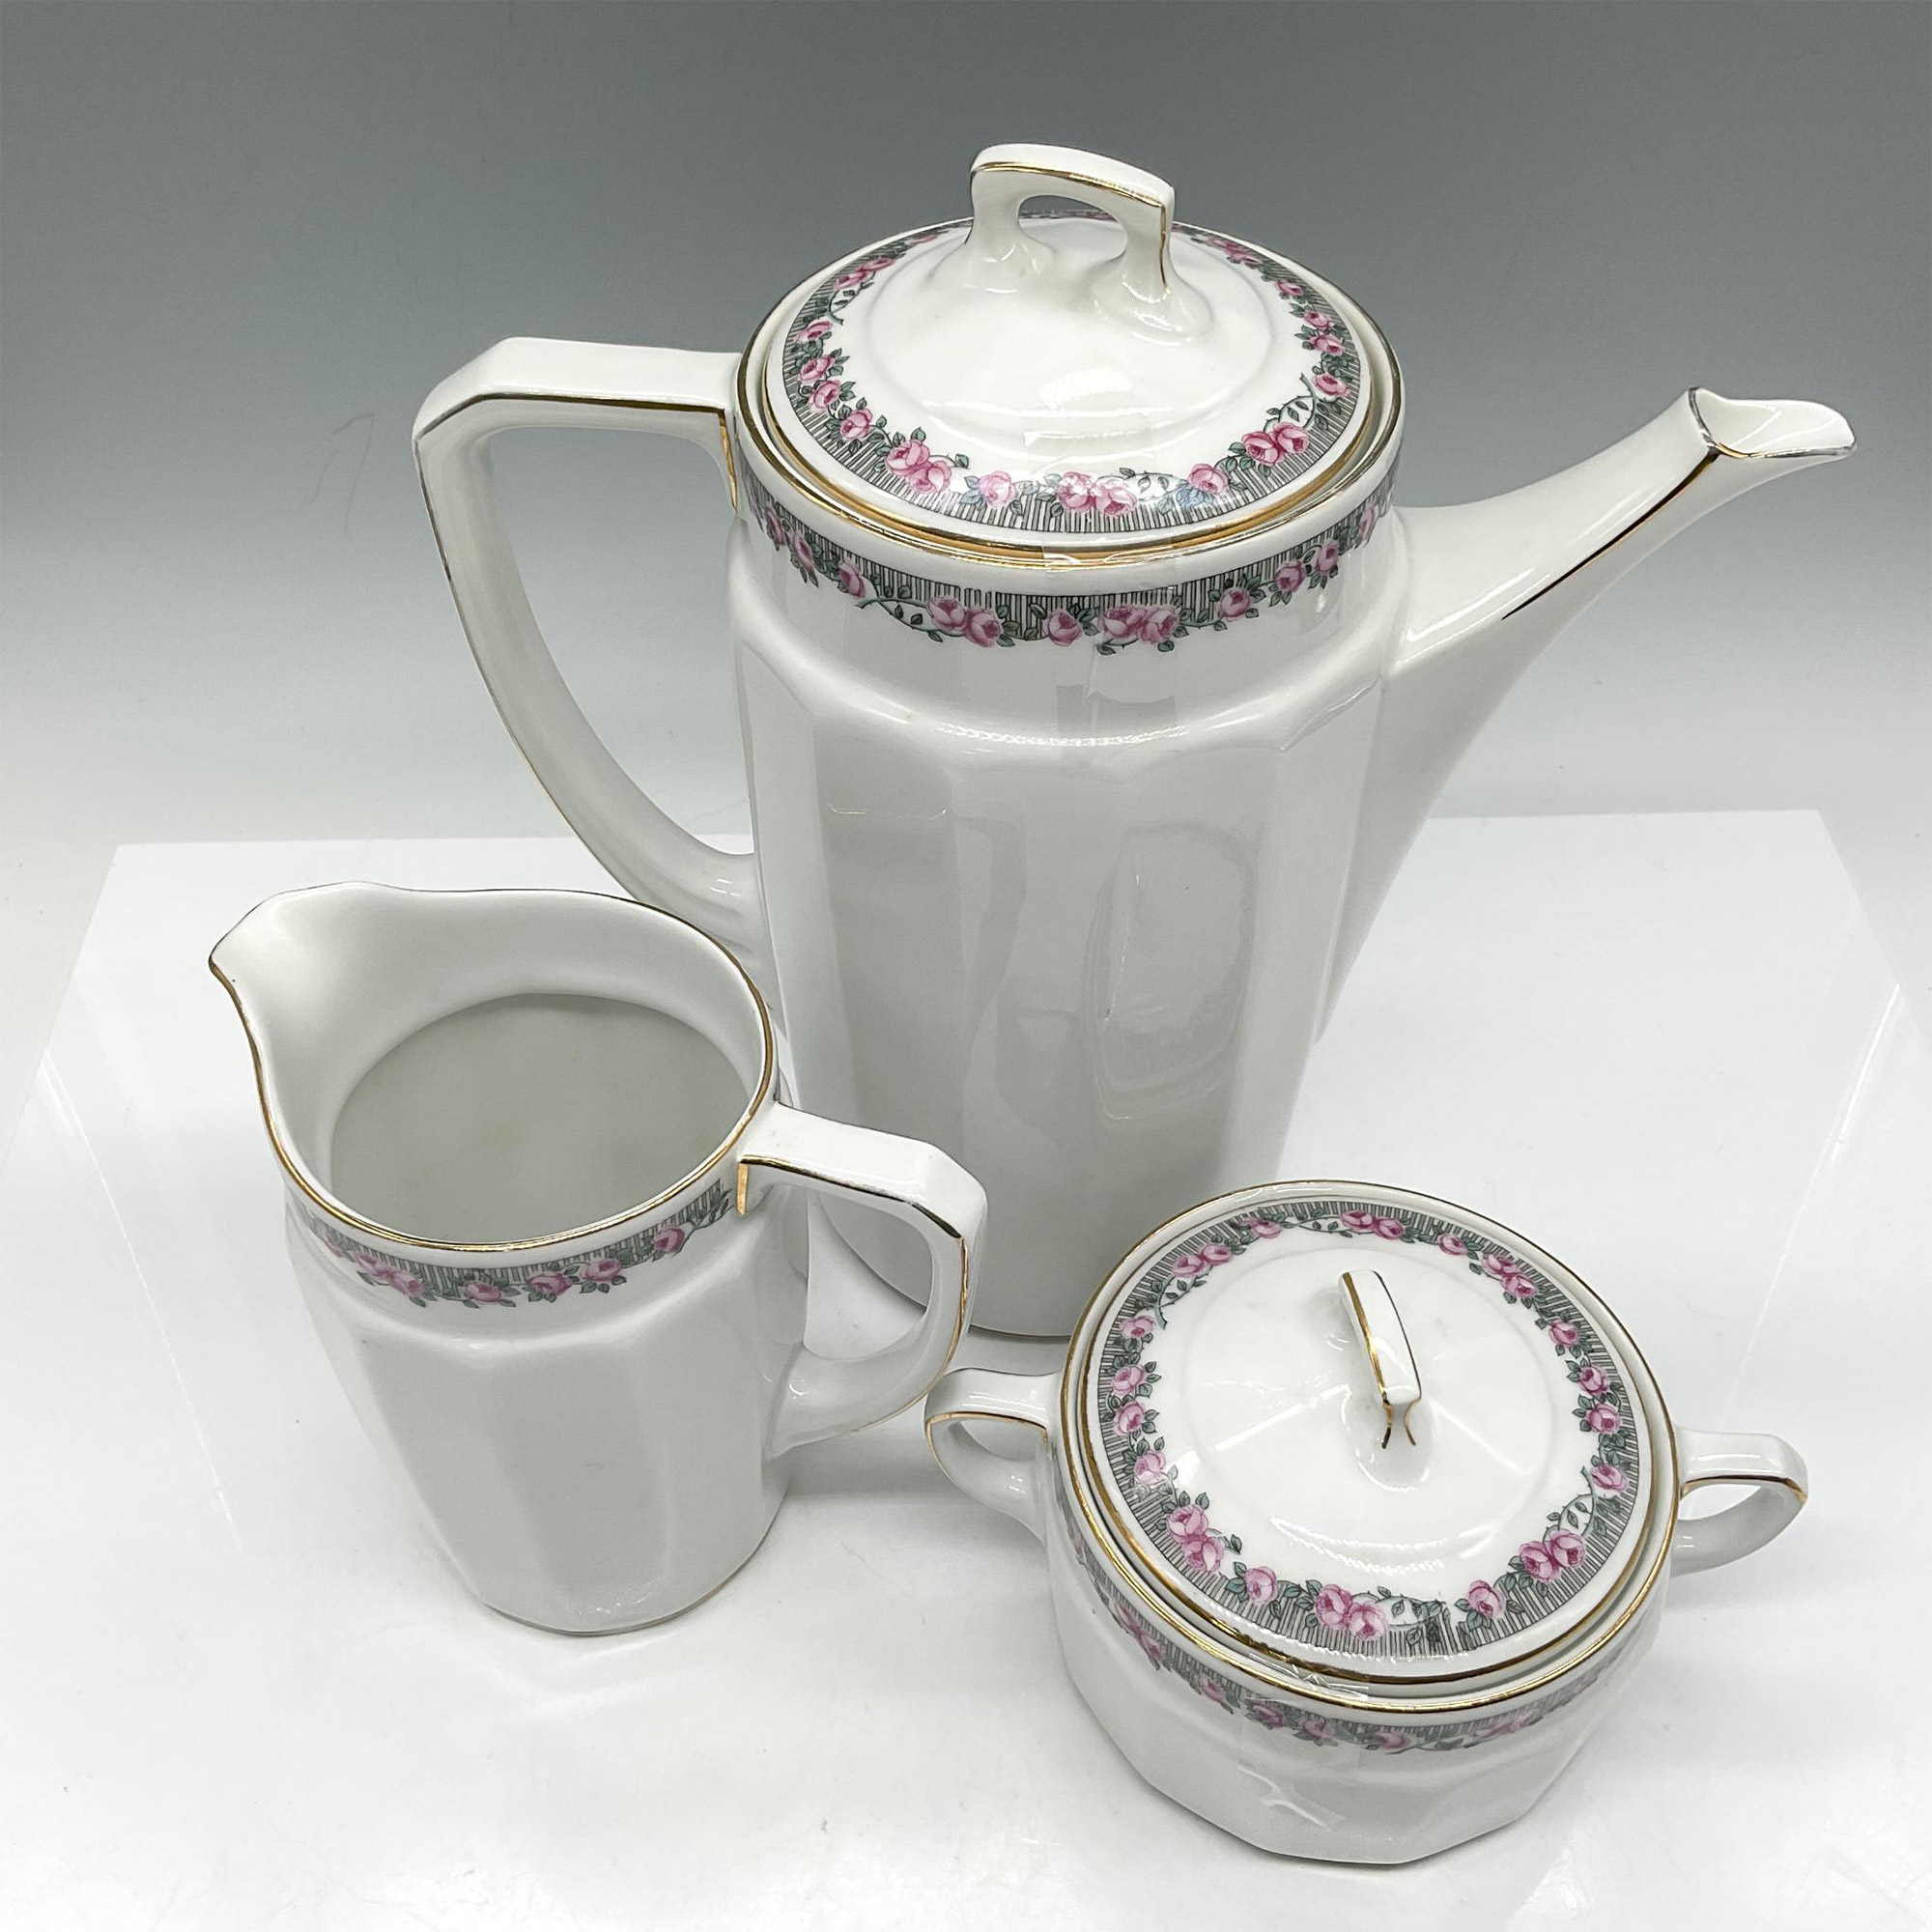 3pc Hutschenreuther Porcelain Coffee Service - Image 3 of 4